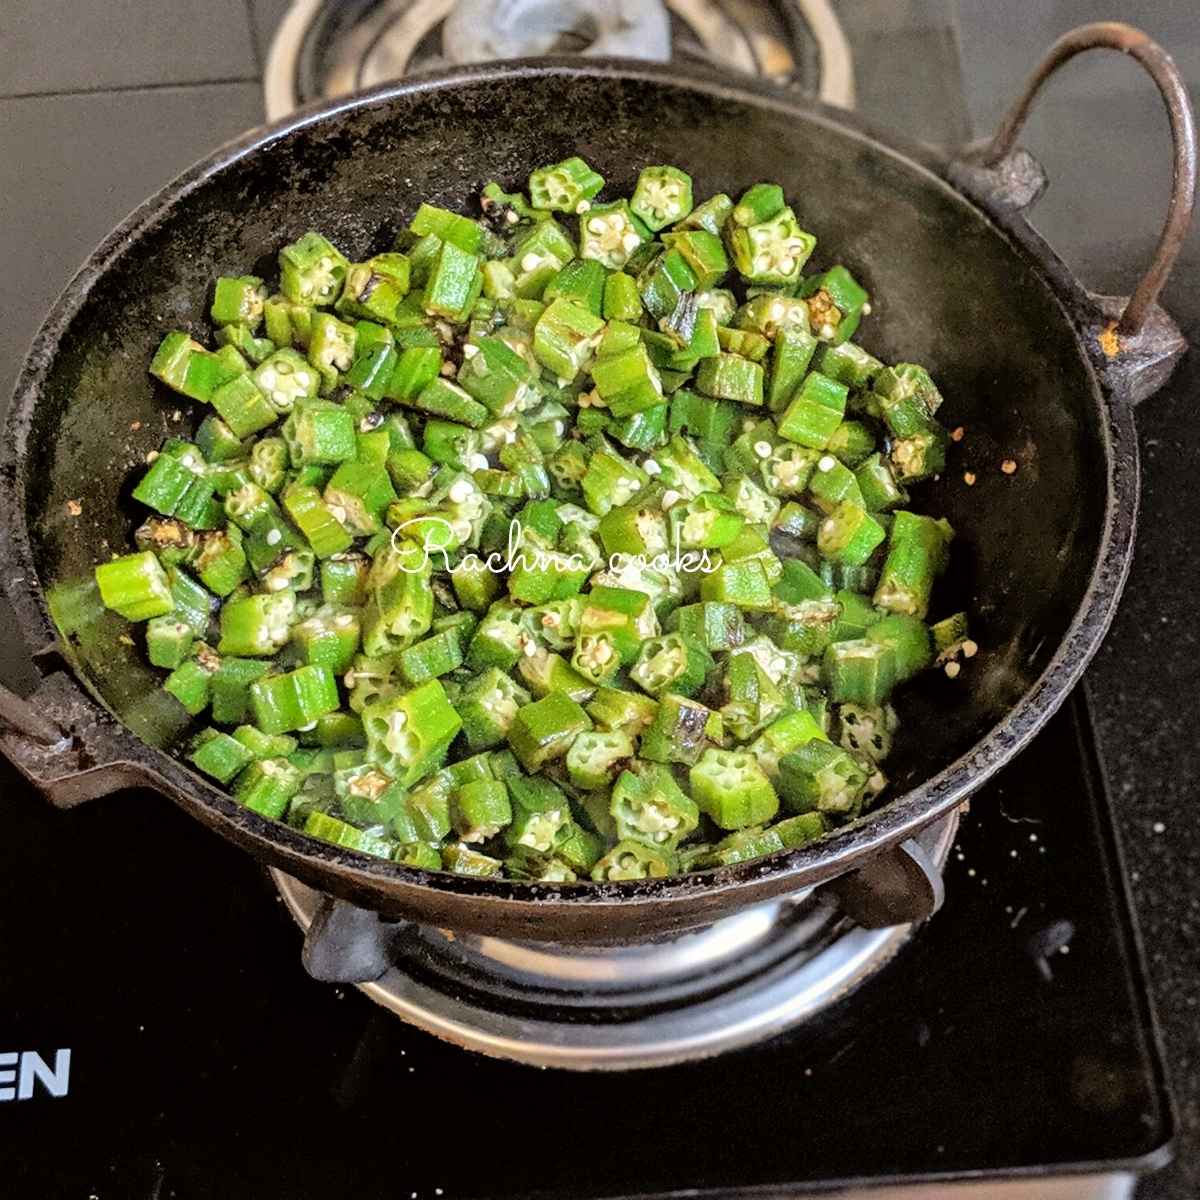 Okra in a skillet for cooking.